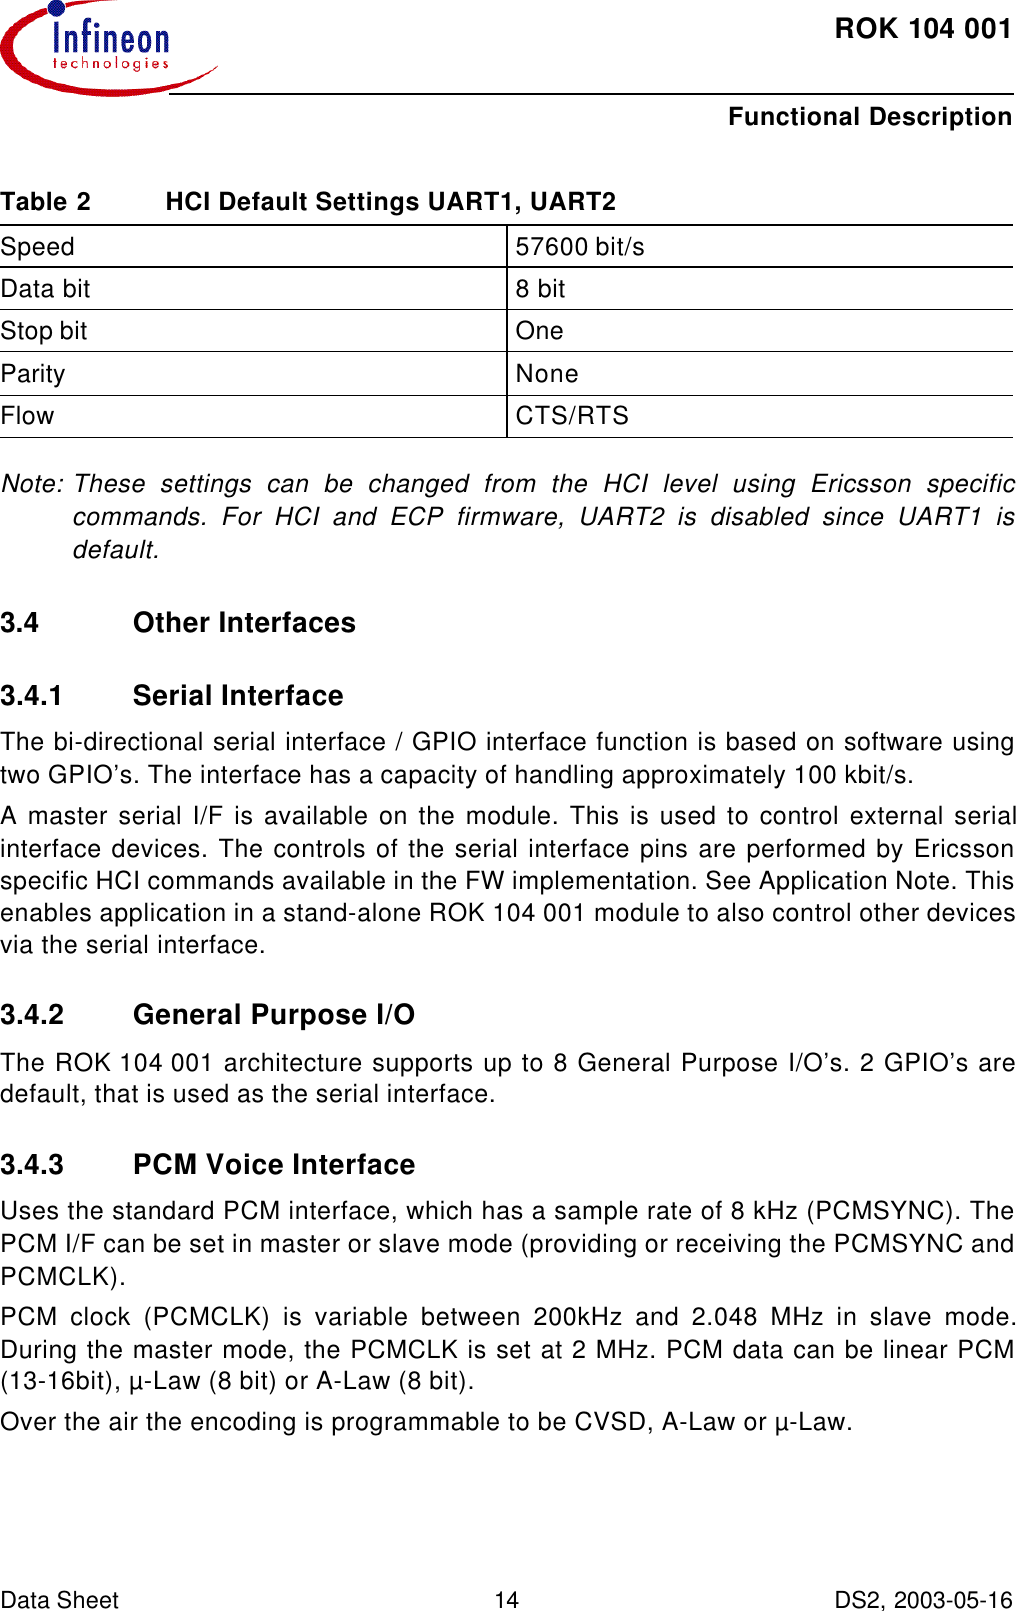 ROK104001Functional DescriptionData Sheet 14 DS2, 2003-05-16   Note: These settings can be changed from the HCI level using Ericsson specificcommands. For HCI and ECP firmware, UART2 is disabled since UART1 isdefault.3.4 Other Interfaces3.4.1 Serial InterfaceThe bi-directional serial interface / GPIO interface function is based on software usingtwo GPIO’s. The interface has a capacity of handling approximately 100 kbit/s.A master serial I/F is available on the module. This is used to control external serialinterface devices. The controls of the serial interface pins are performed by Ericssonspecific HCI commands available in the FW implementation. See Application Note. Thisenables application in a stand-alone ROK 104 001 module to also control other devicesvia the serial interface.3.4.2 General Purpose I/O The ROK104001 architecture supports up to 8 General Purpose I/O’s. 2 GPIO’s aredefault, that is used as the serial interface.3.4.3 PCM Voice InterfaceUses the standard PCM interface, which has a sample rate of 8 kHz (PCMSYNC). ThePCM I/F can be set in master or slave mode (providing or receiving the PCMSYNC andPCMCLK).PCM clock (PCMCLK) is variable between 200kHz and 2.048 MHz in slave mode.During the master mode, the PCMCLK is set at 2 MHz. PCM data can be linear PCM(13-16bit), µ-Law (8 bit) or A-Law (8 bit). Over the air the encoding is programmable to be CVSD, A-Law or µ-Law.Table2 HCI Default Settings UART1, UART2Speed 57600 bit/sData bit 8 bitStop bit OneParity NoneFlow CTS/RTS